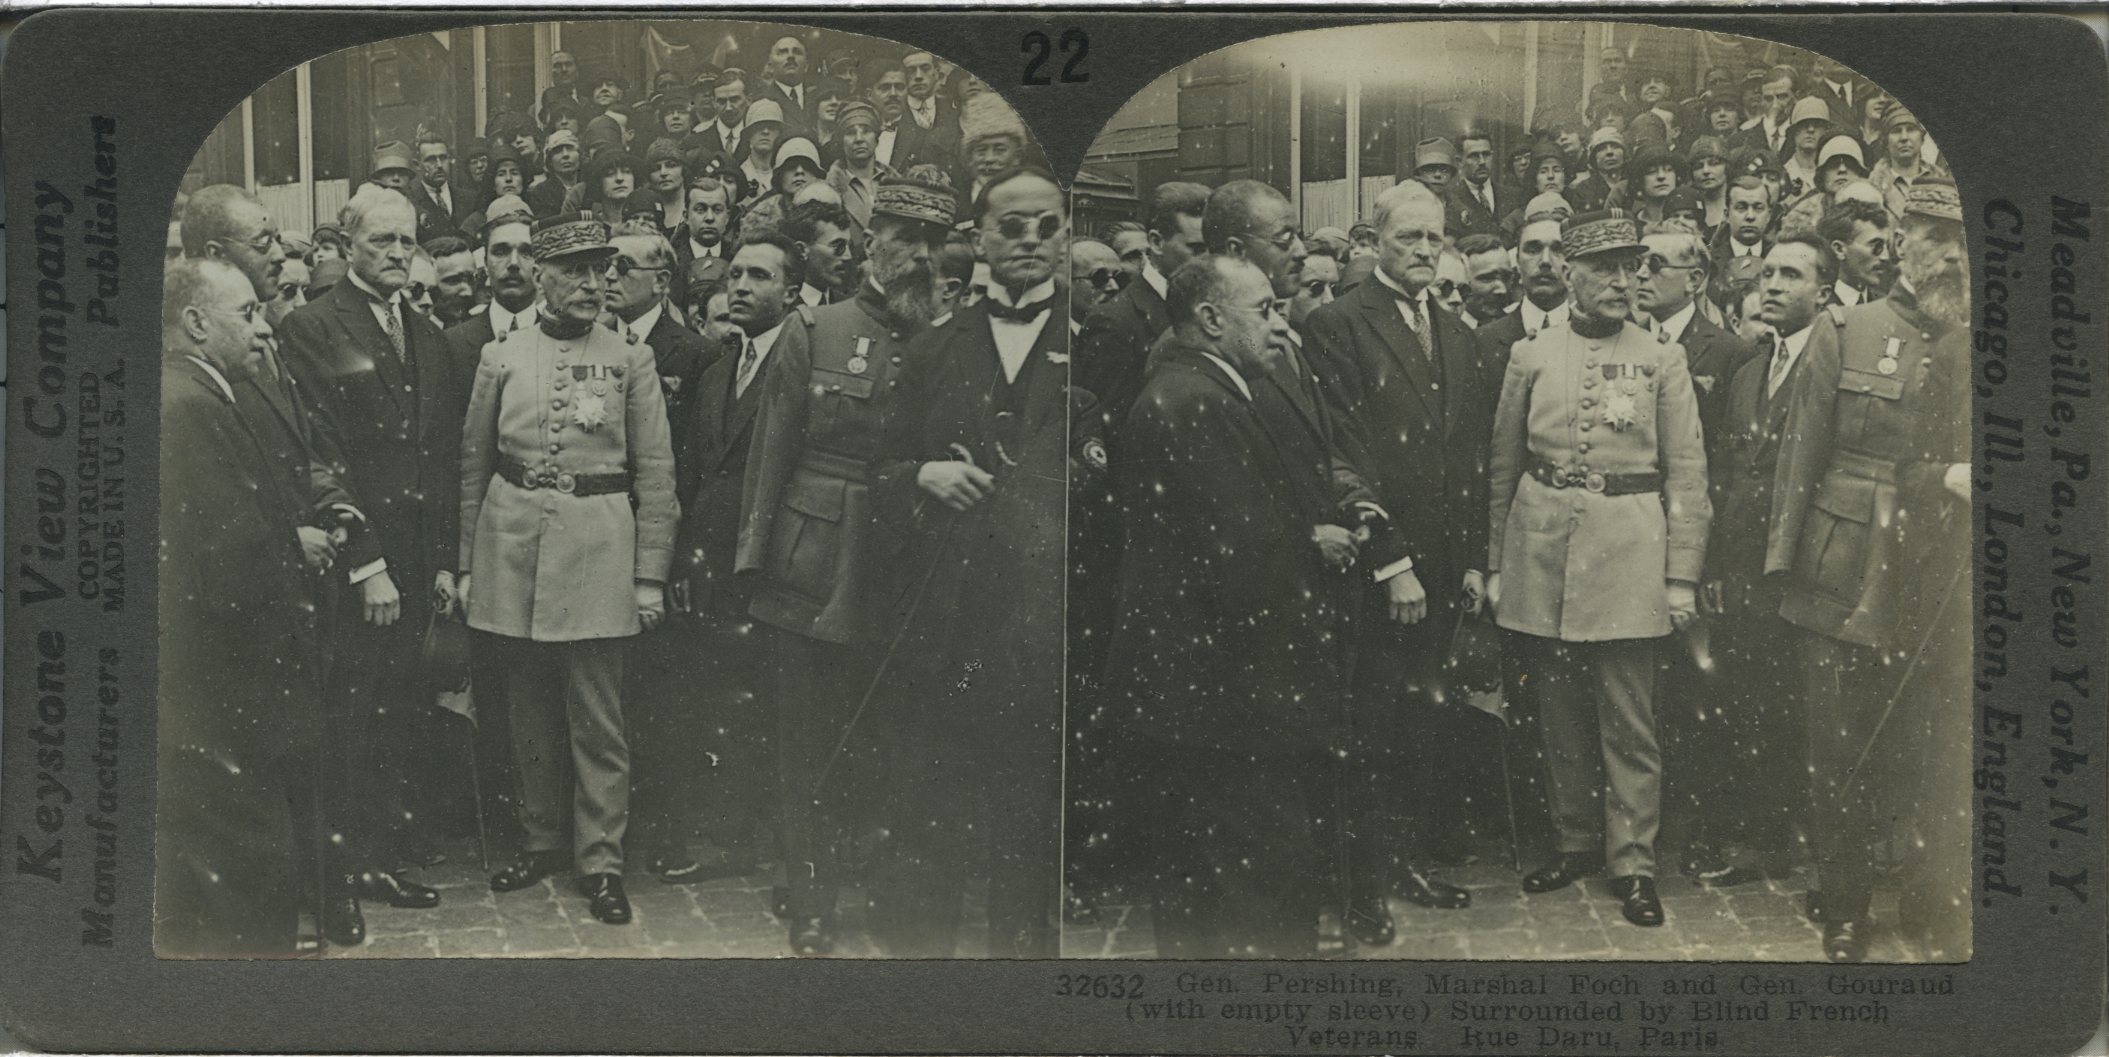 Gen. Pershing, Marshal Foch and Gen. Gouraud (with empty sleeve) Surrounded by Blind French Veterans, Rue Daru, Paris.